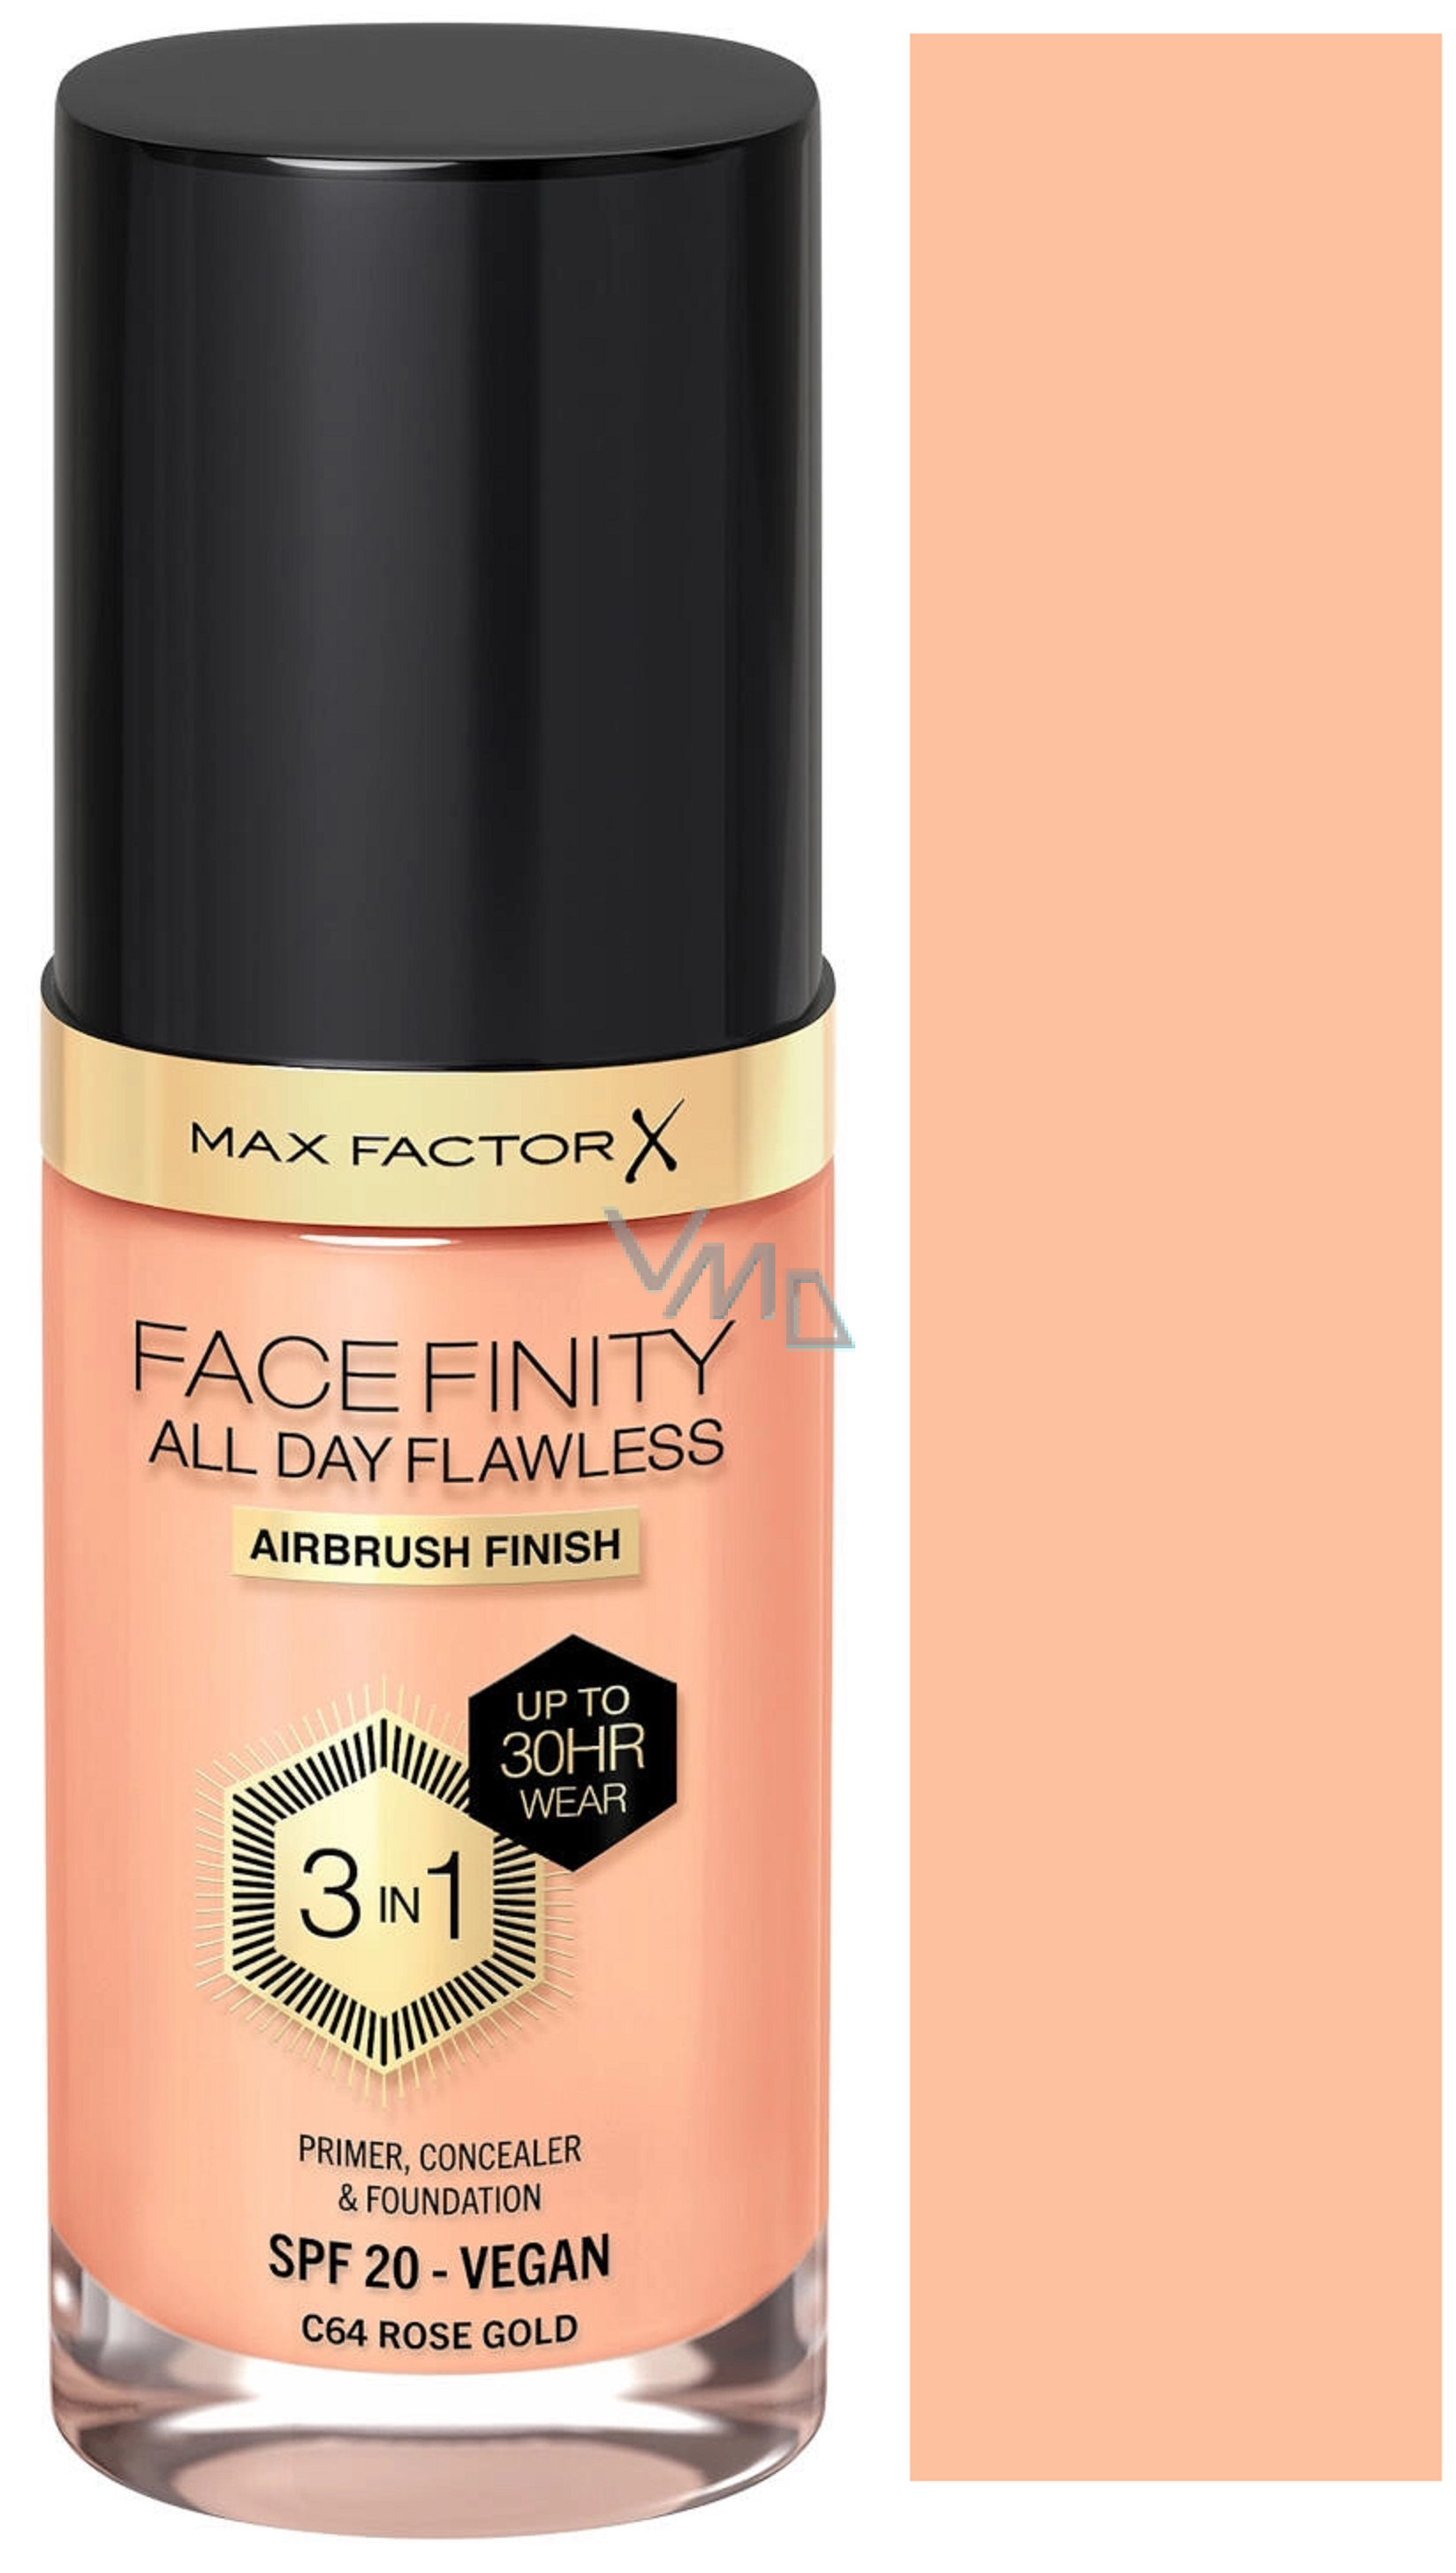 30 VMD ml Factor - - C64 Day Flawless Max Facefinity Gold Rose All 3in1 parfumerie Make-up drogerie